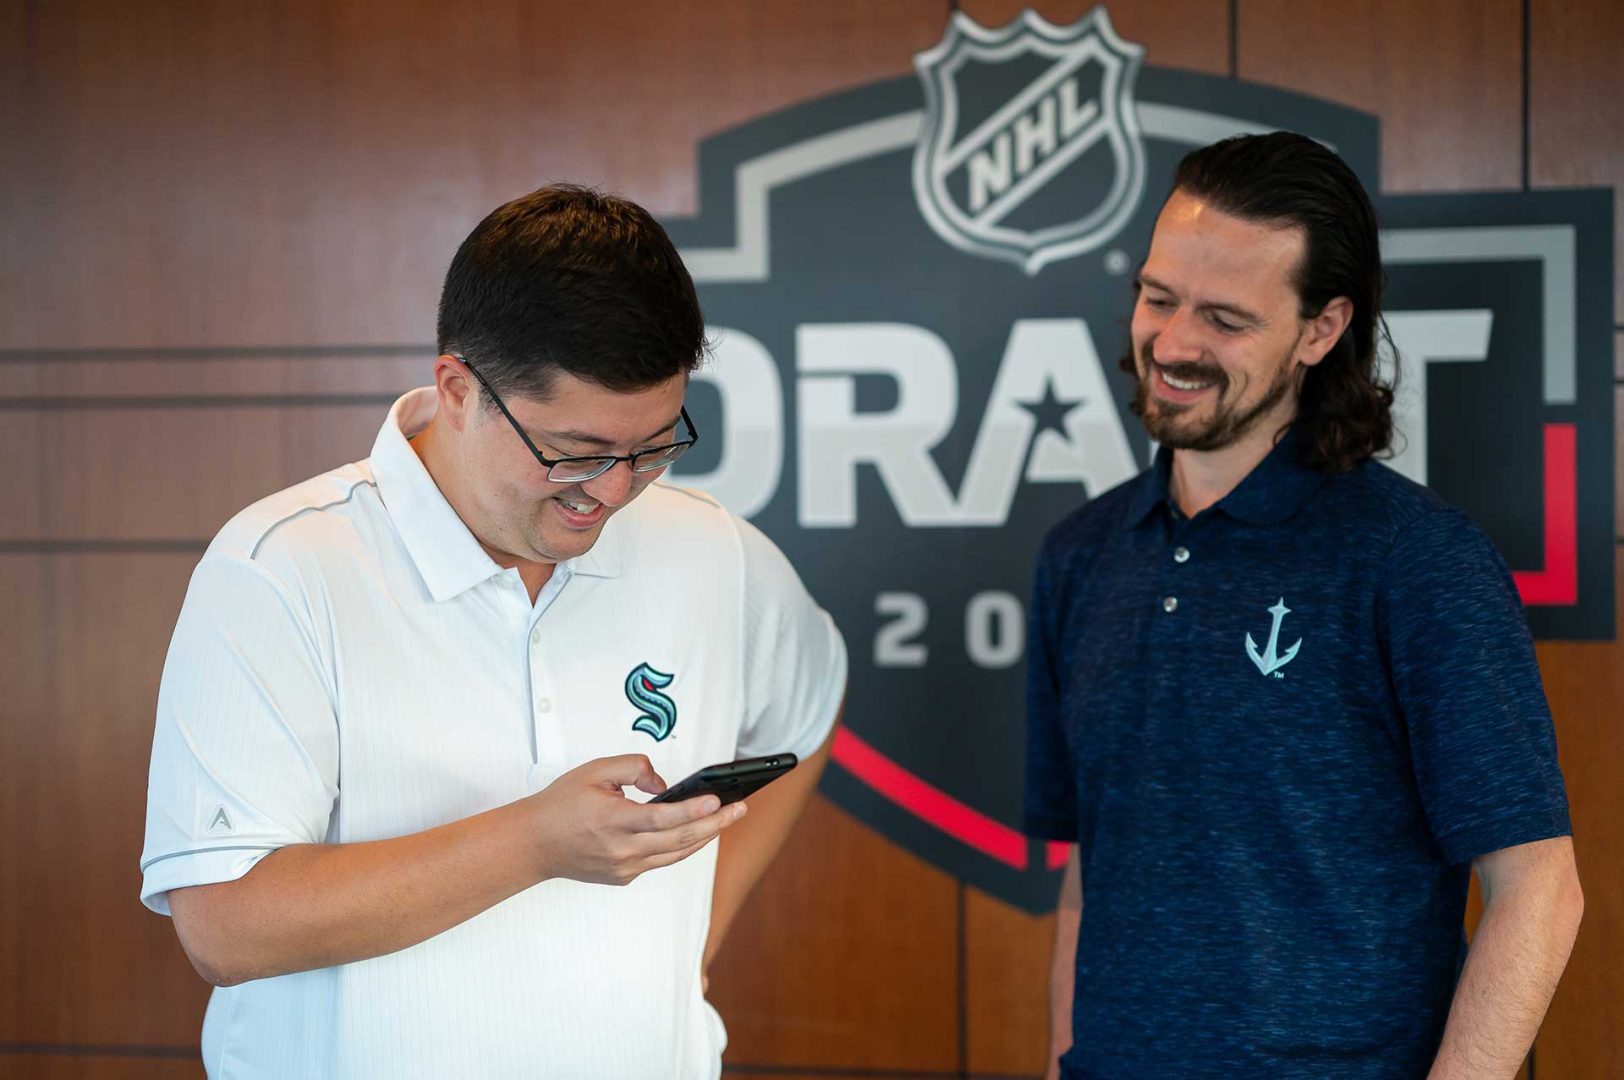 Two men in Seattle Kraken shirts smile as one looks at his phone prior to the NHL expansion draft.